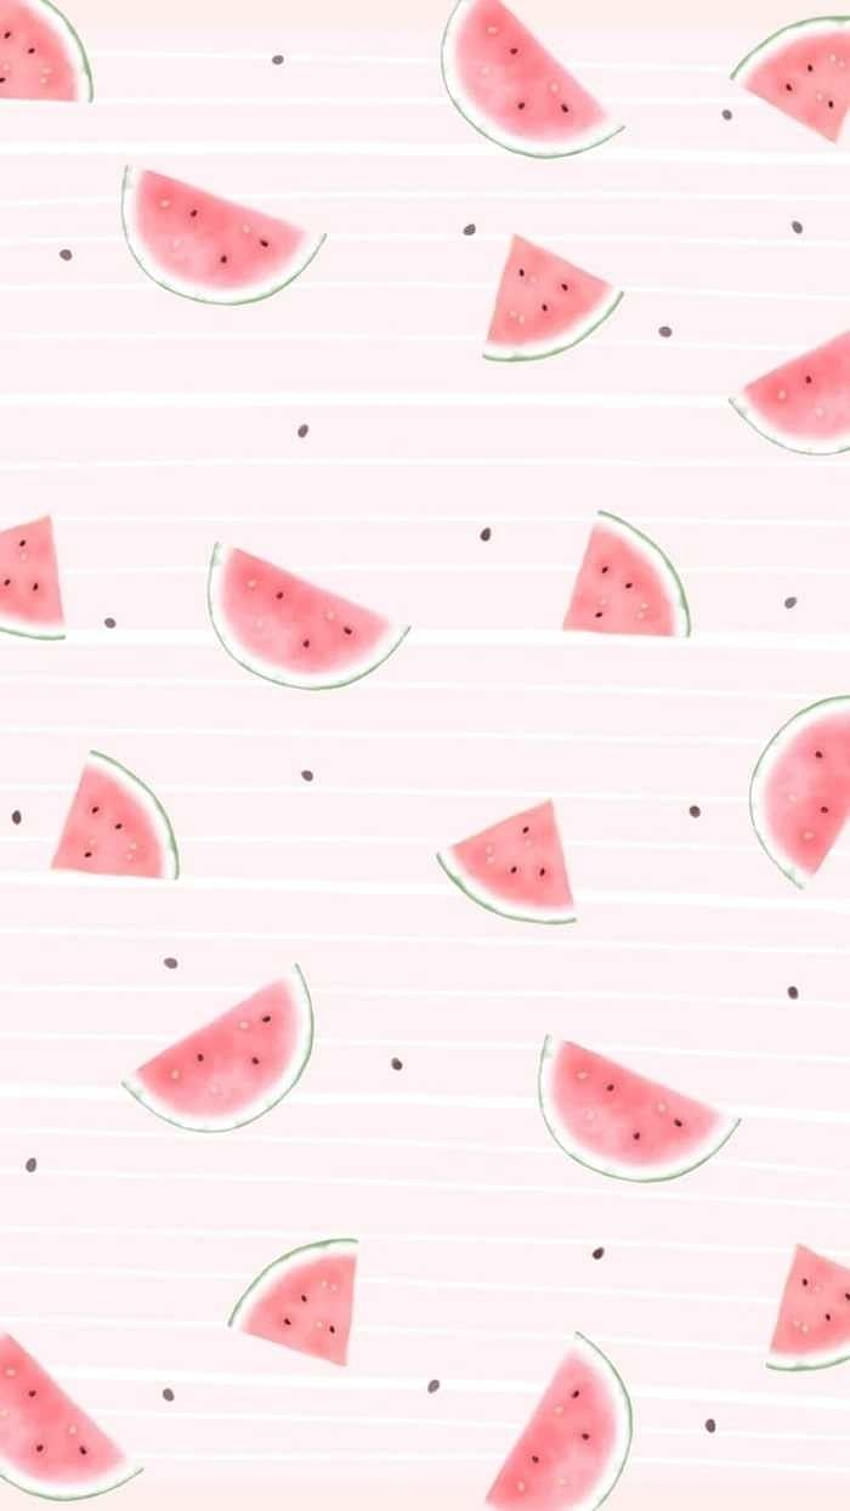 20 Melon HD Wallpapers and Backgrounds